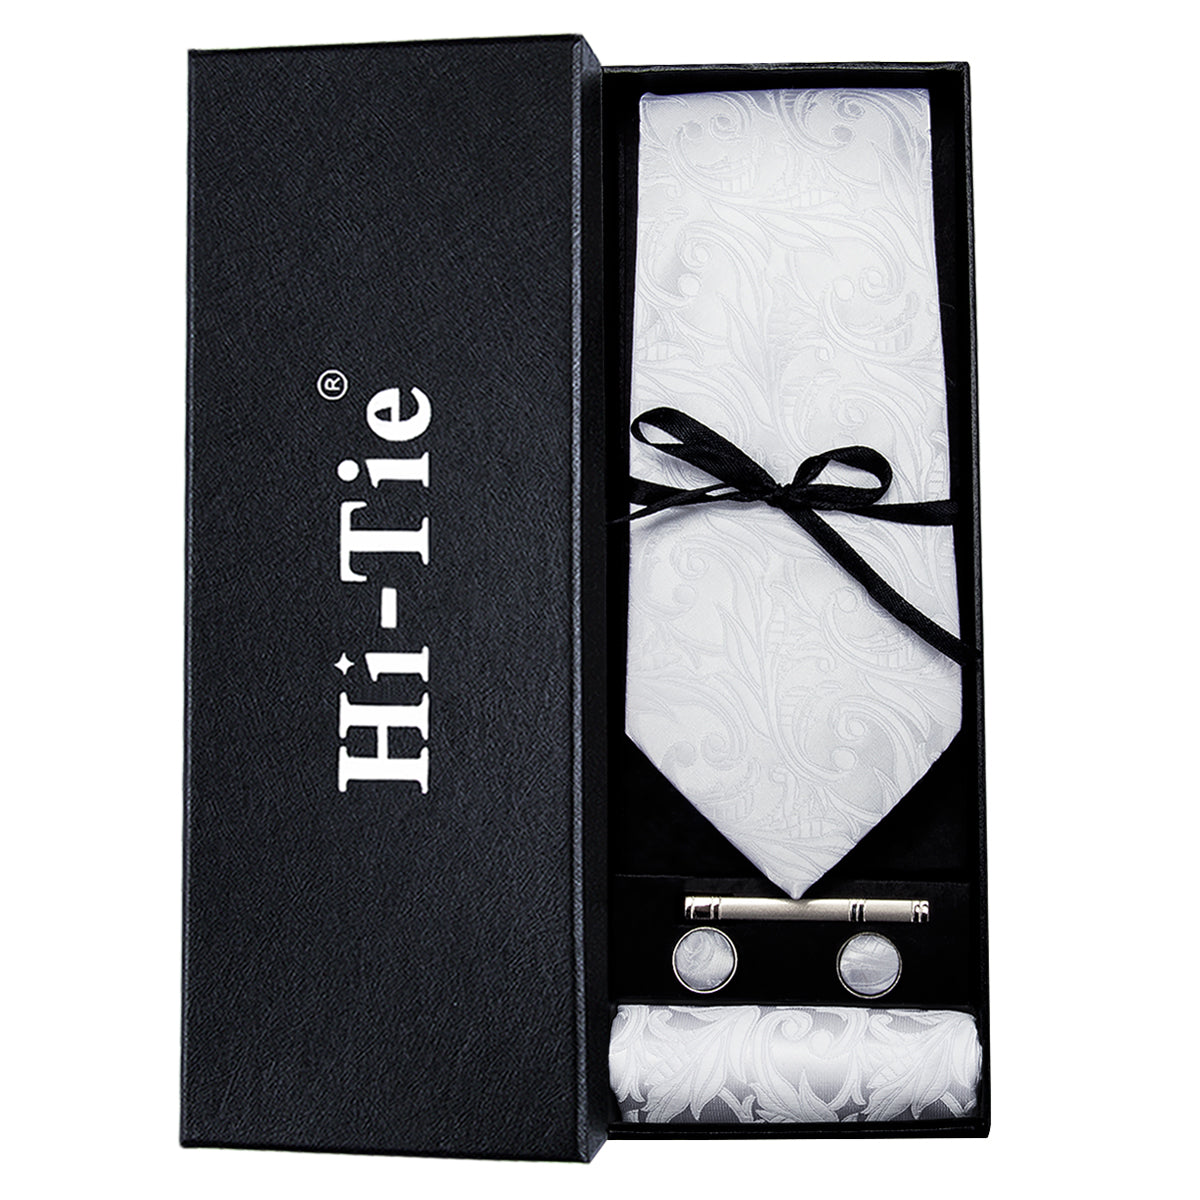 Silver White Floral Tie Pocket Square Cufflinks Gift Box Set